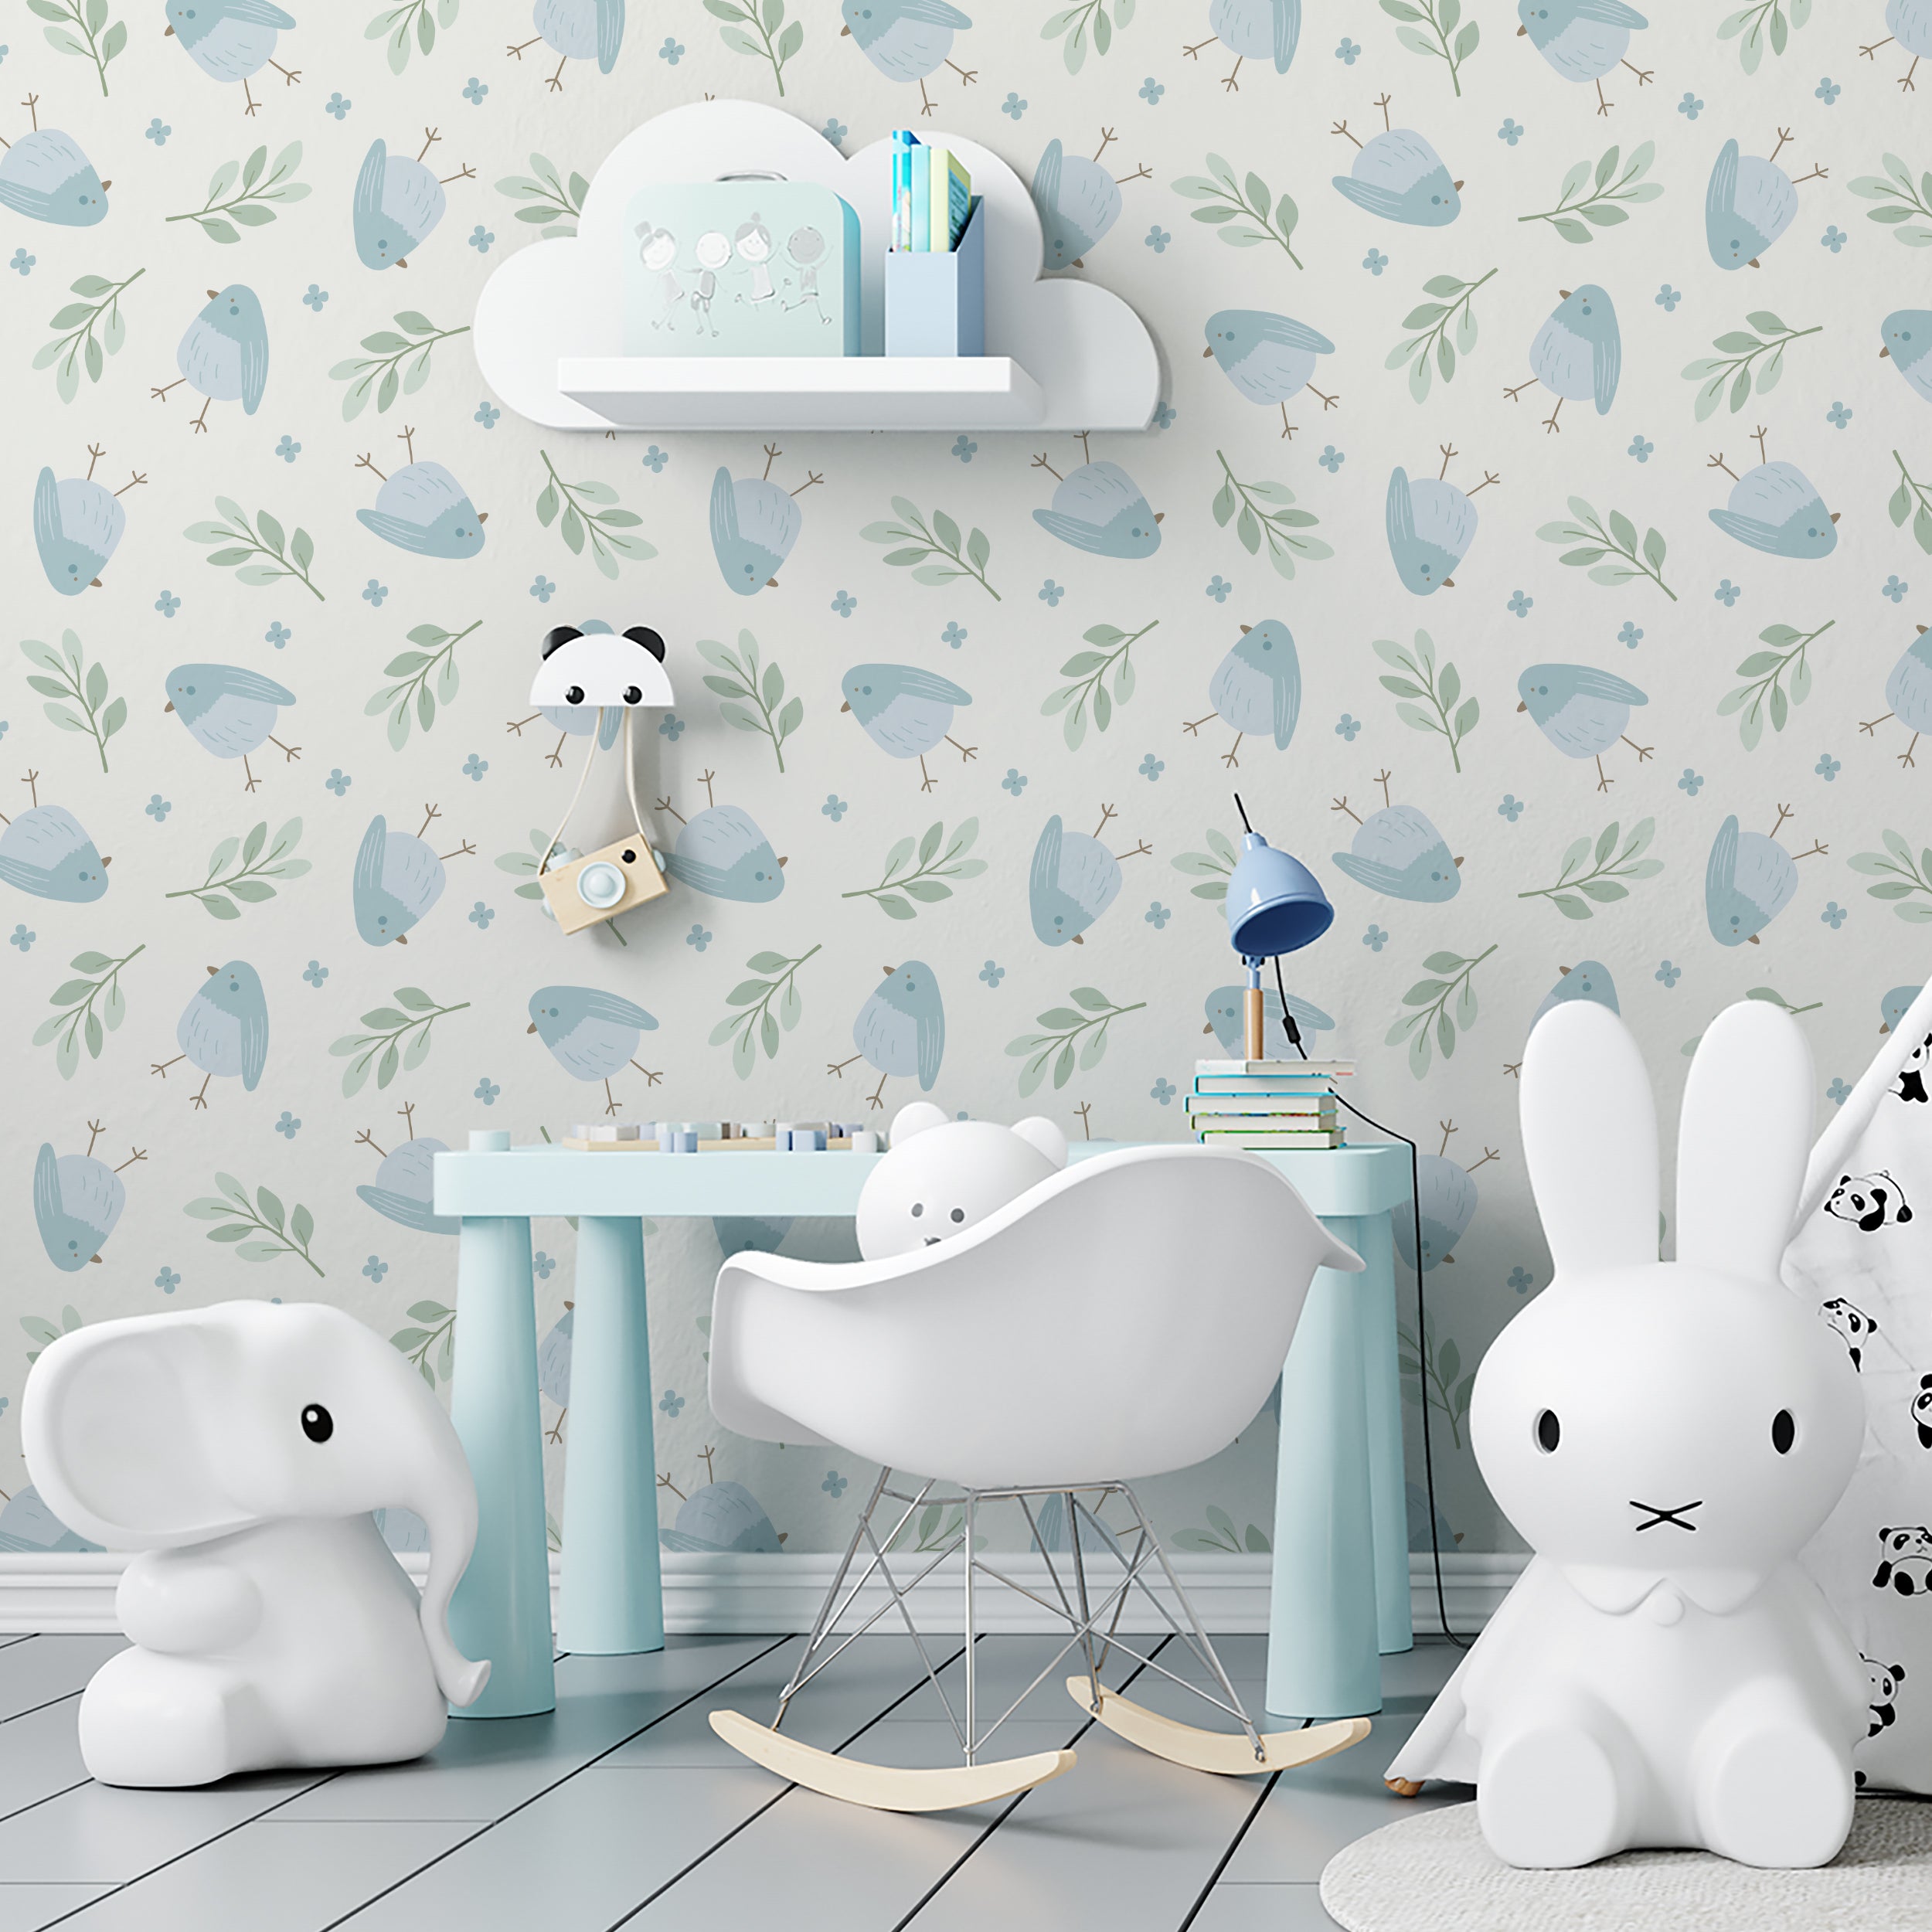 A delightful nursery room decorated with Baby Blue Bird Wallpaper, showcasing soft blue and green tones. The room features adorable children's furniture including a whimsical elephant chair and a panda lamp, creating a playful and soothing environment.